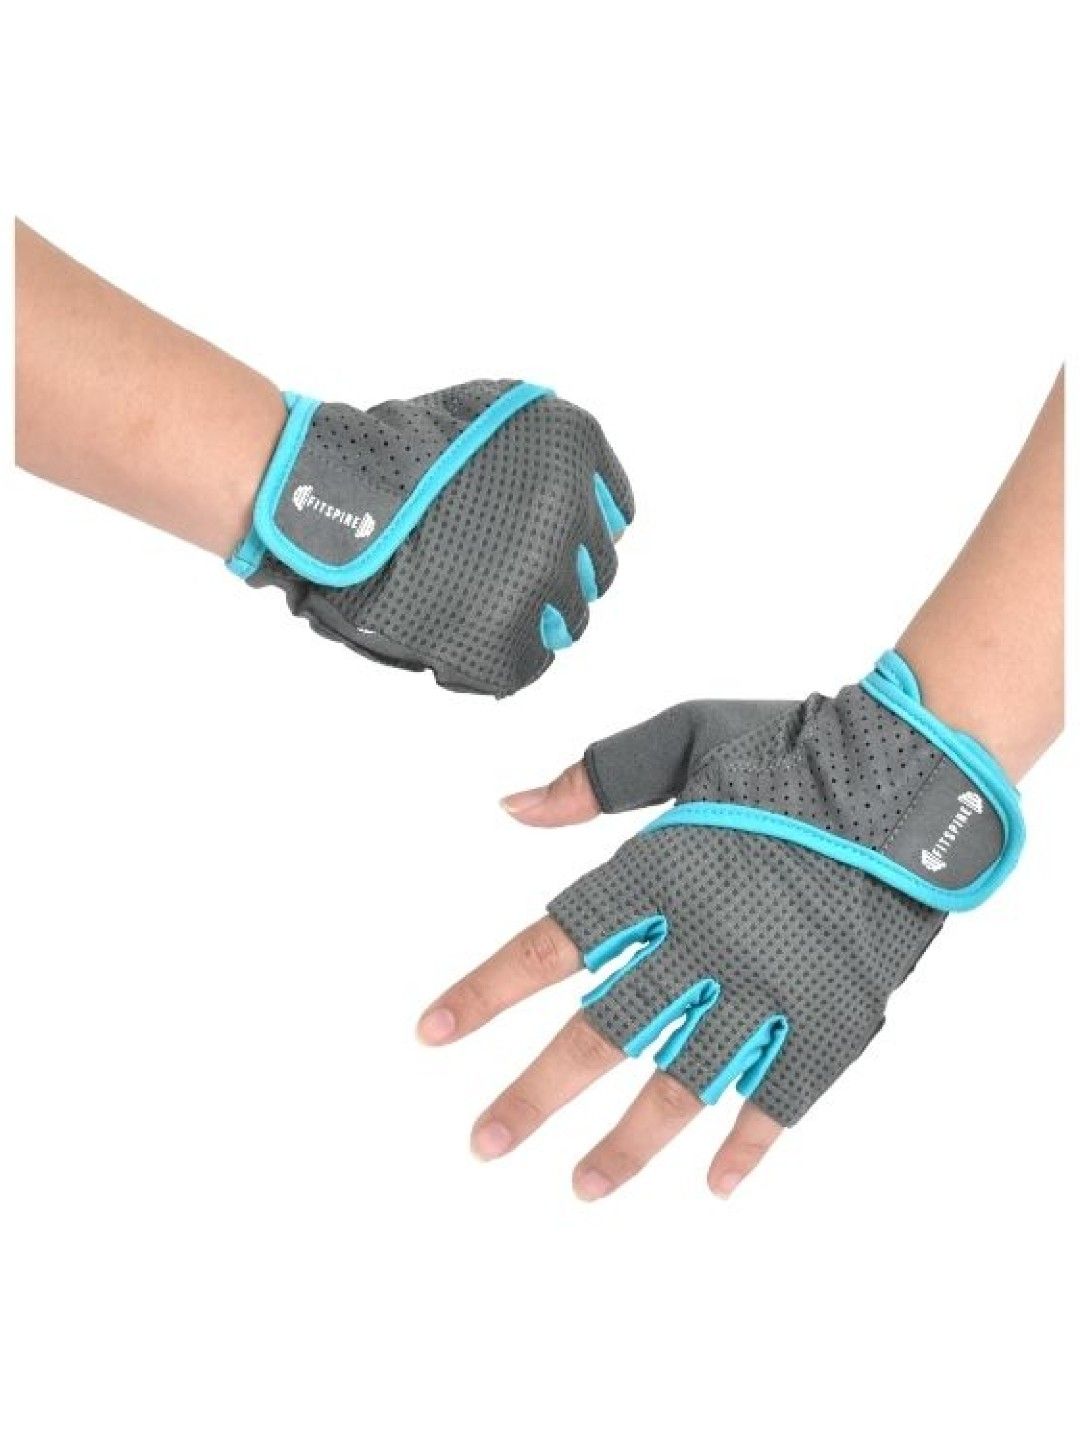 Sunbeams Lifestyle Fitspire Training Gloves Microfiber Workout Equipment (Women) (No Color- Image 1)